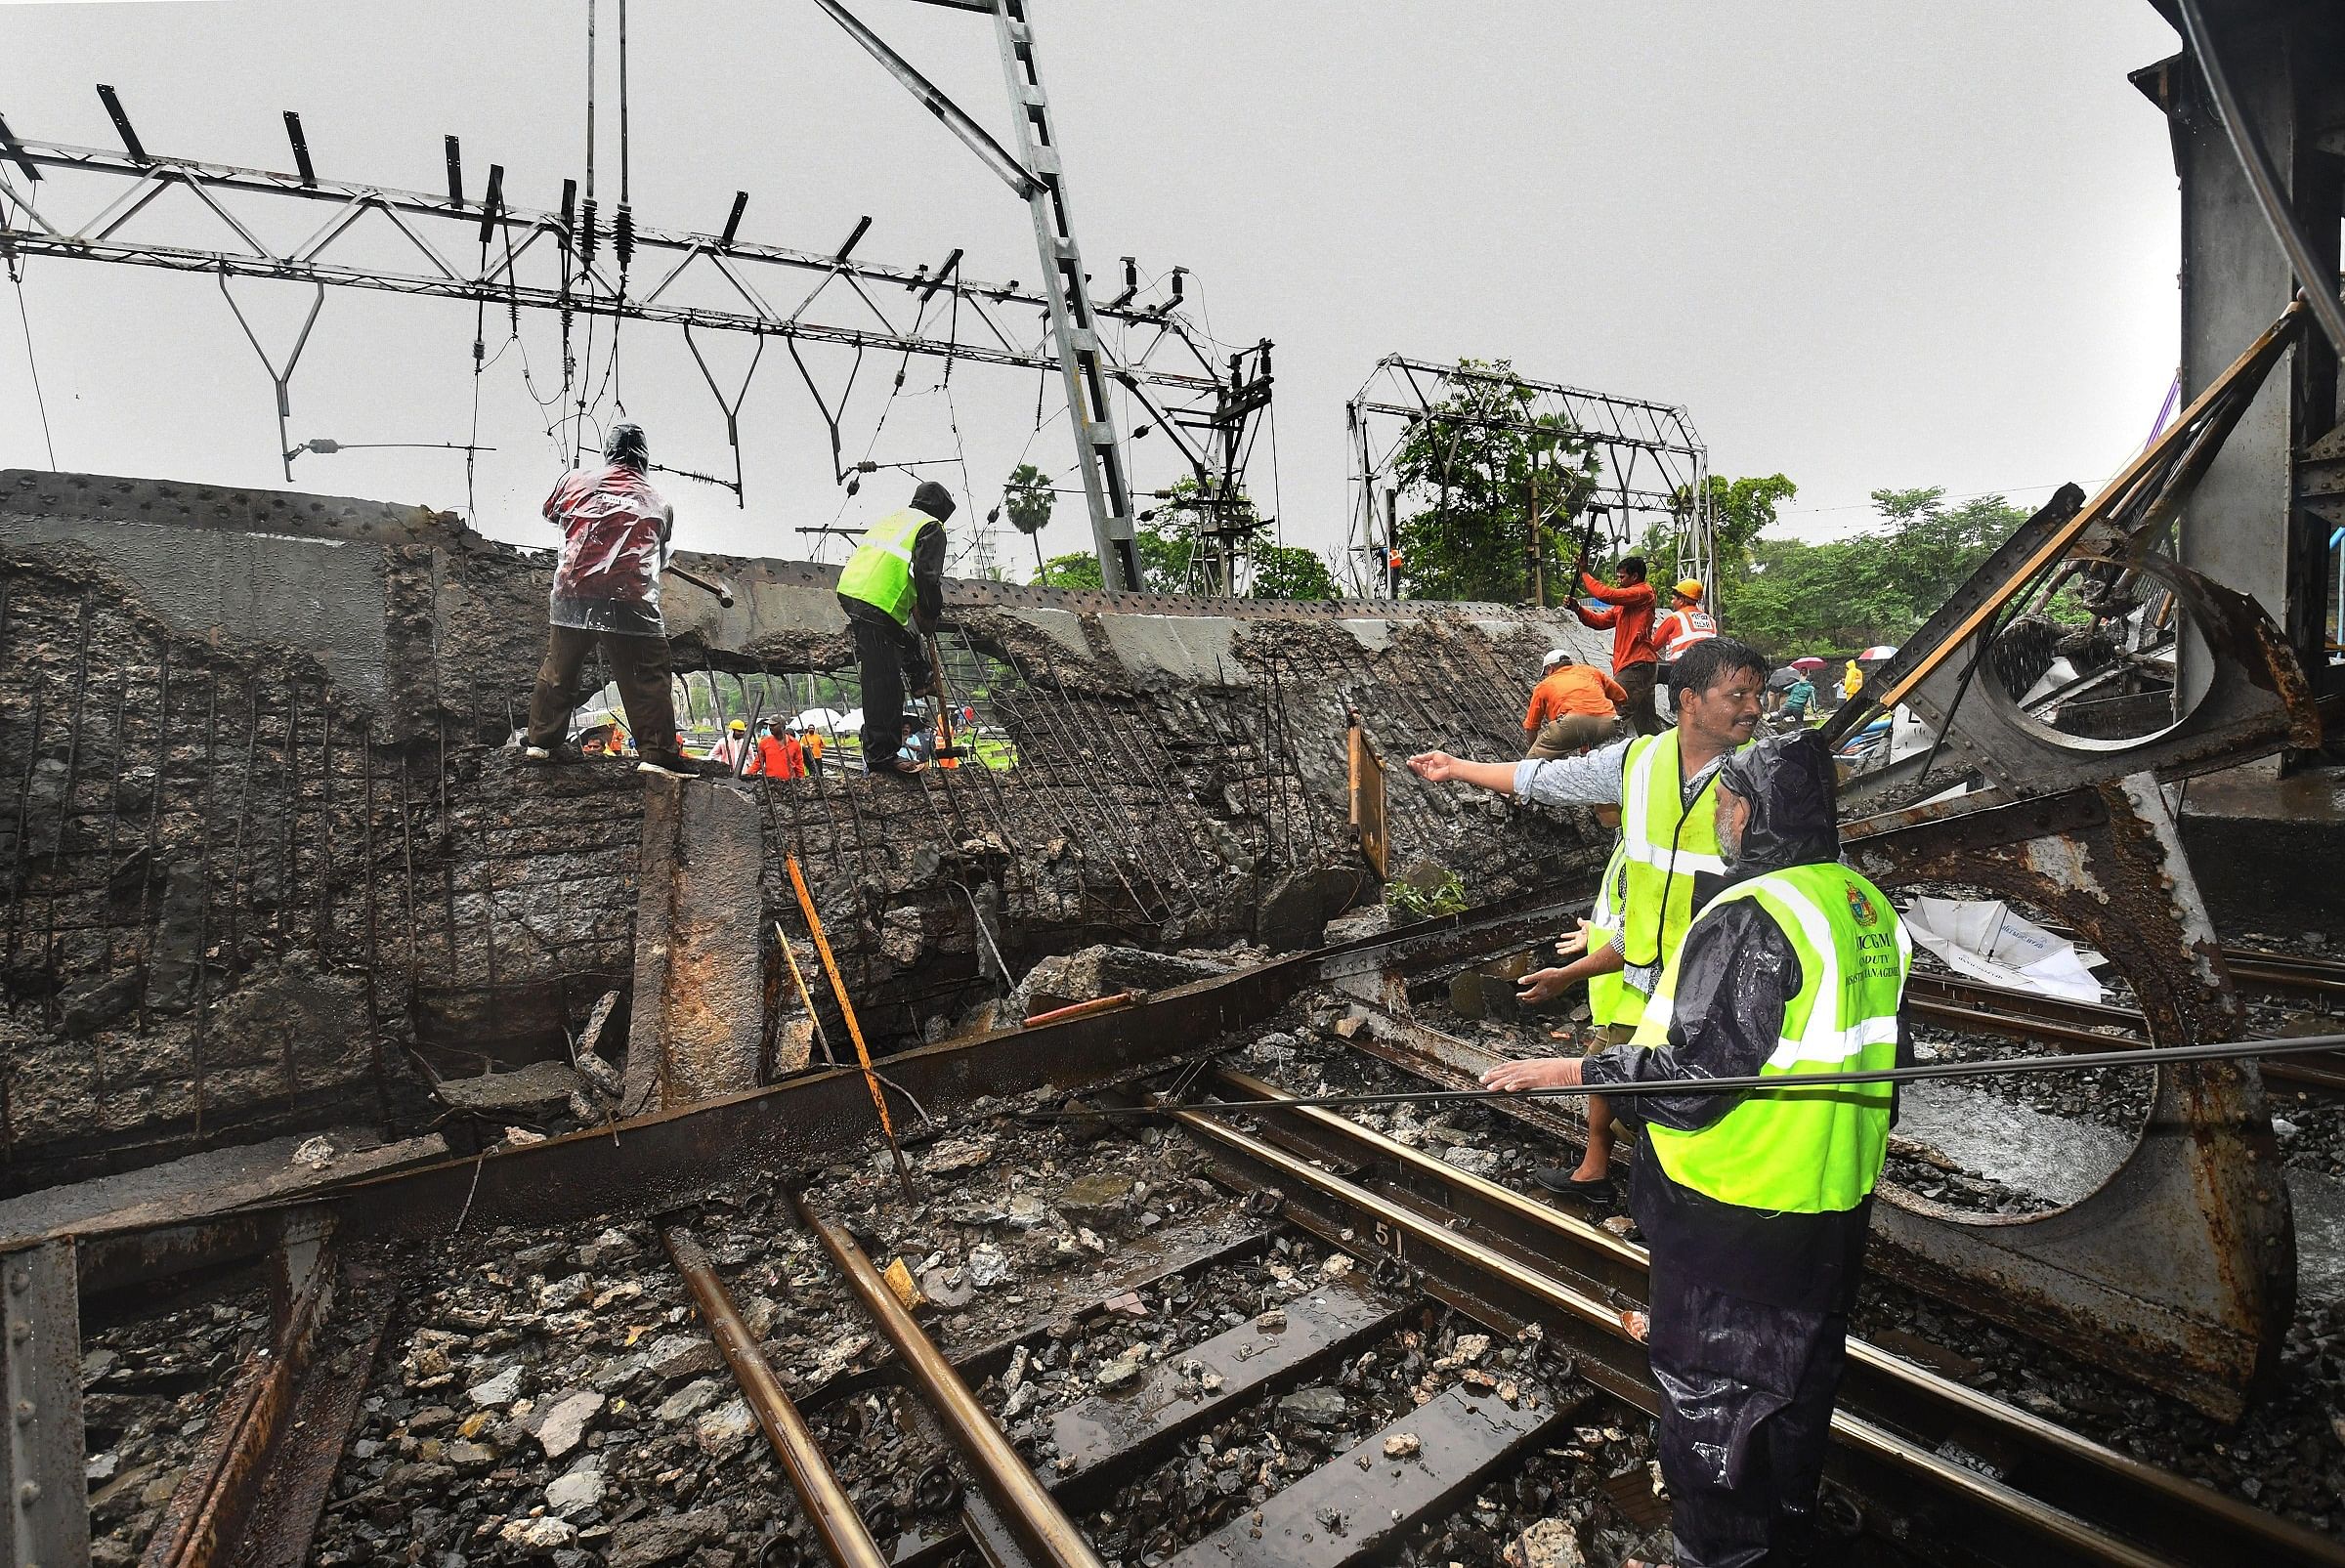 A part of the Gokhale foot overbridge that collapsed on the Western Railway tracks, at Andheri station following heavy rain, in Mumbai July 03, 2018. PTI file photo